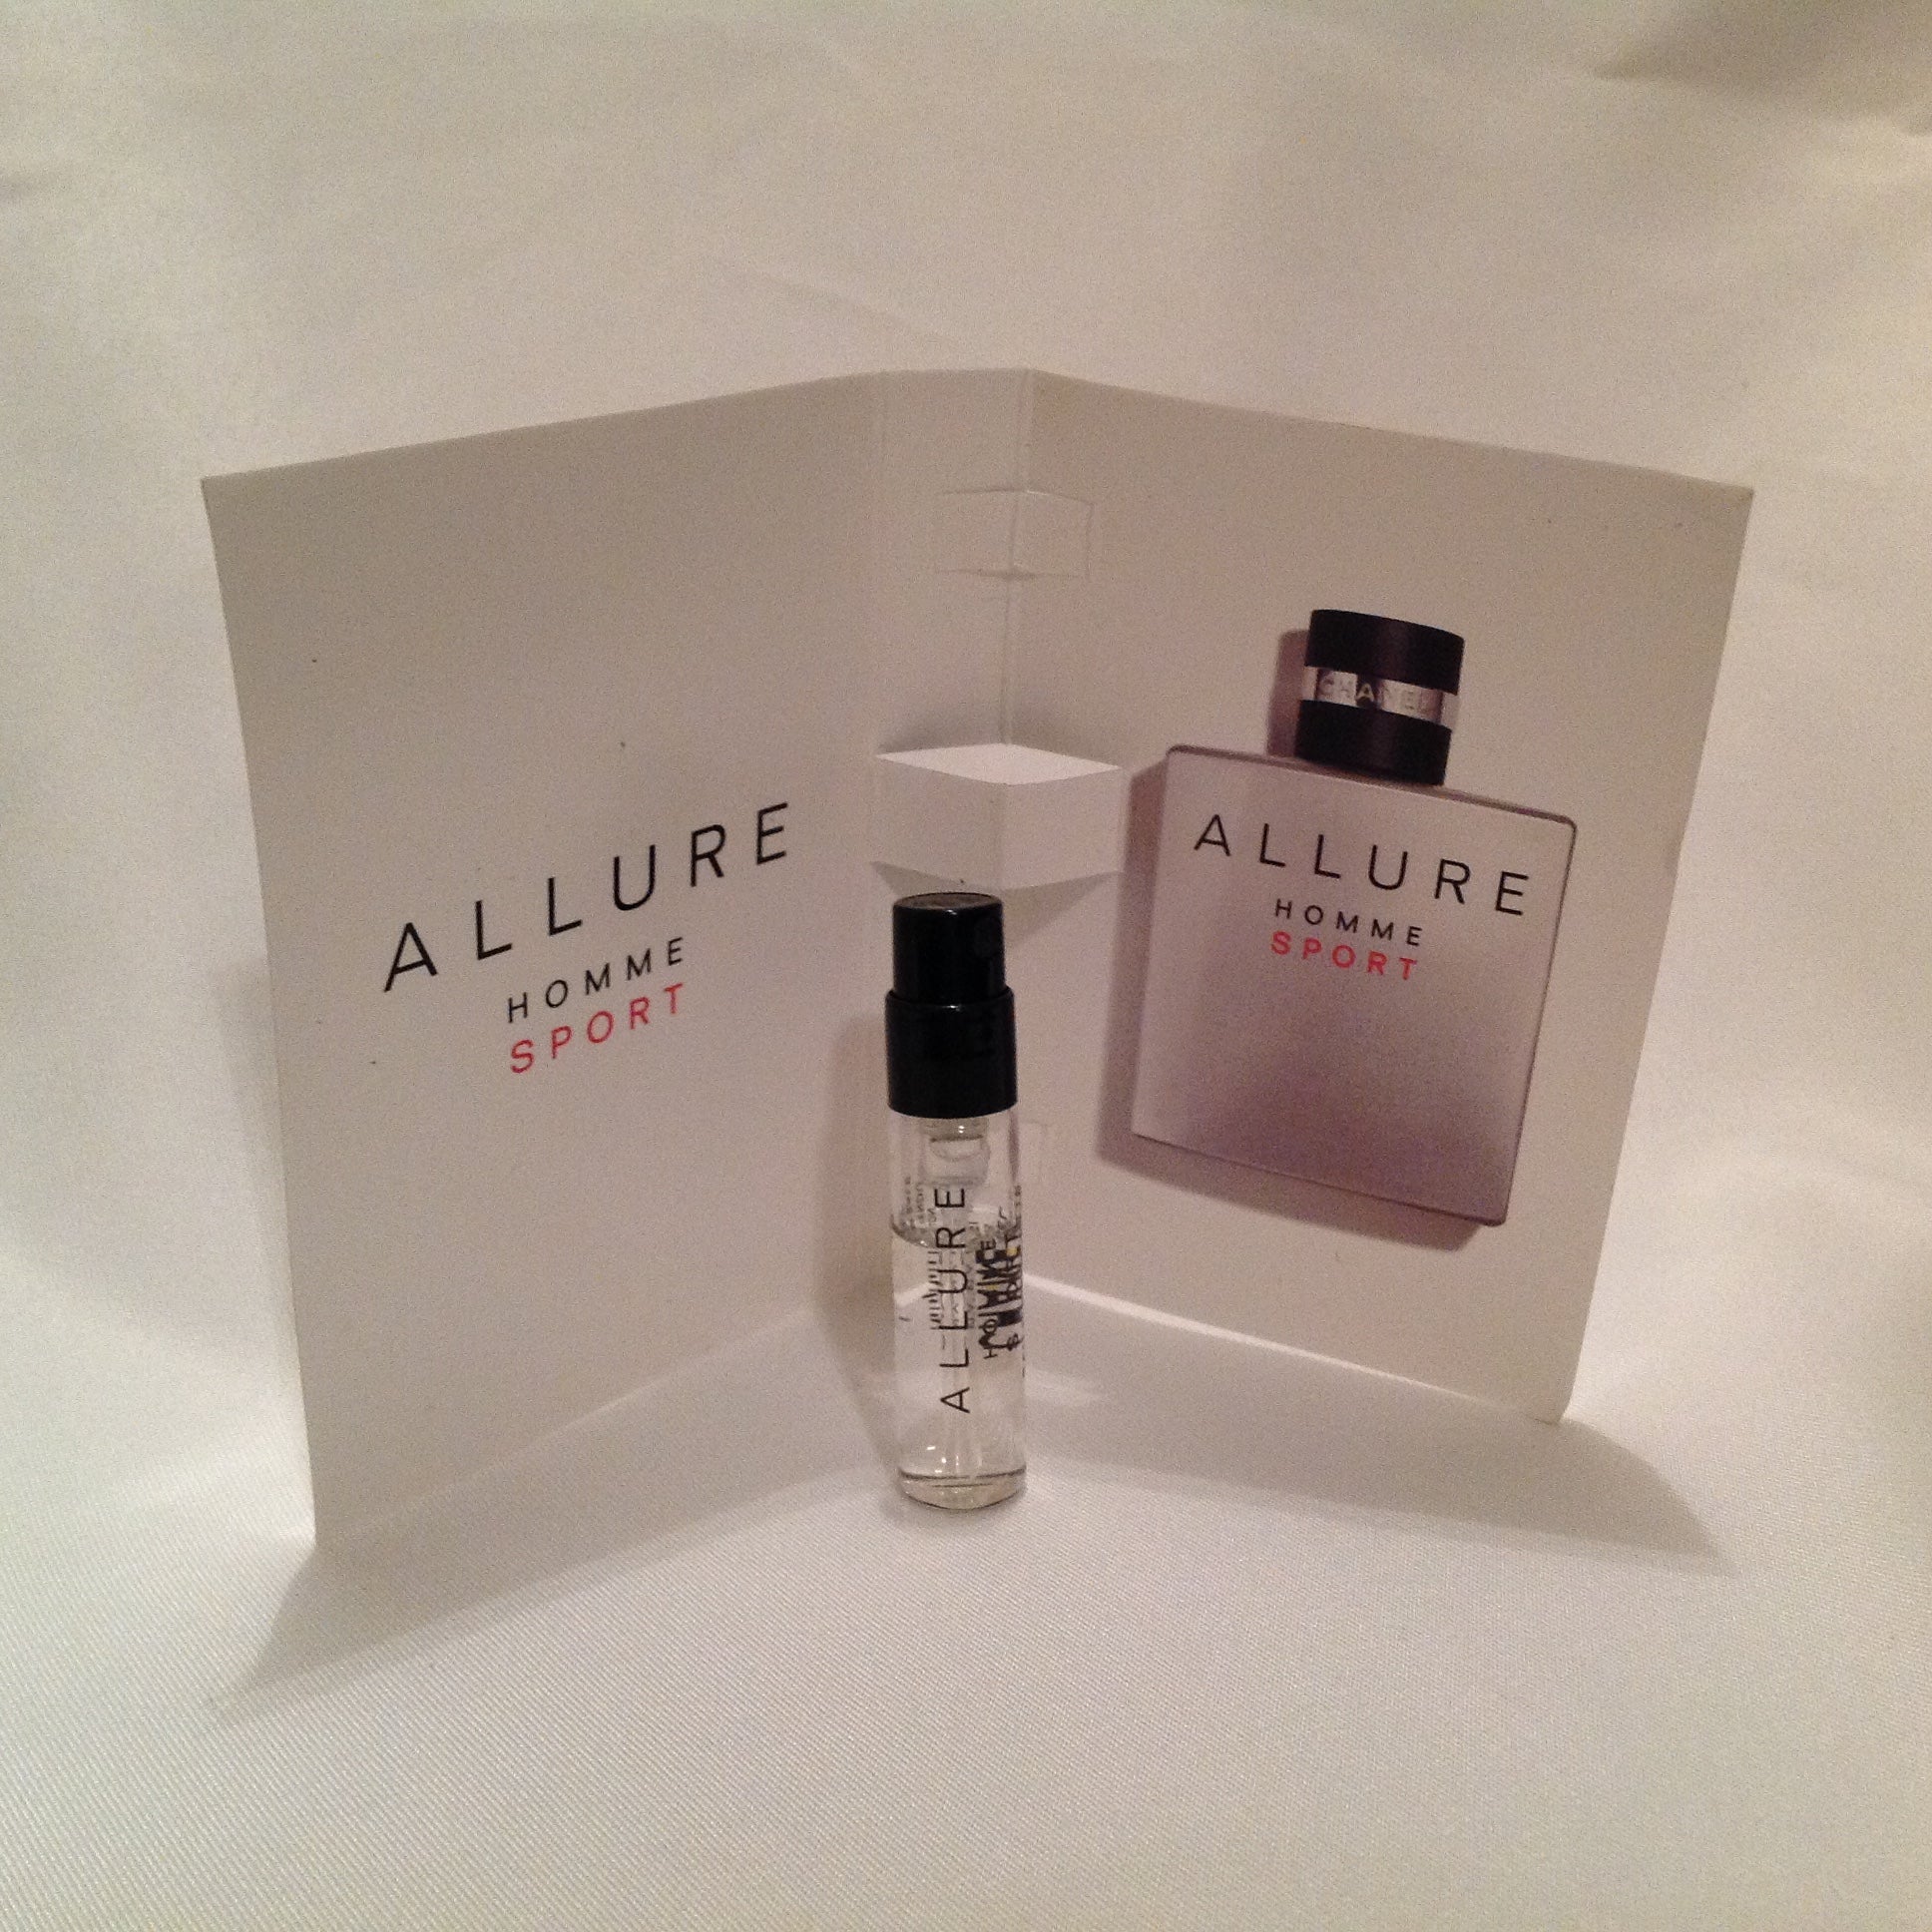 Chanel: Allure Homme Sport - The Girl House